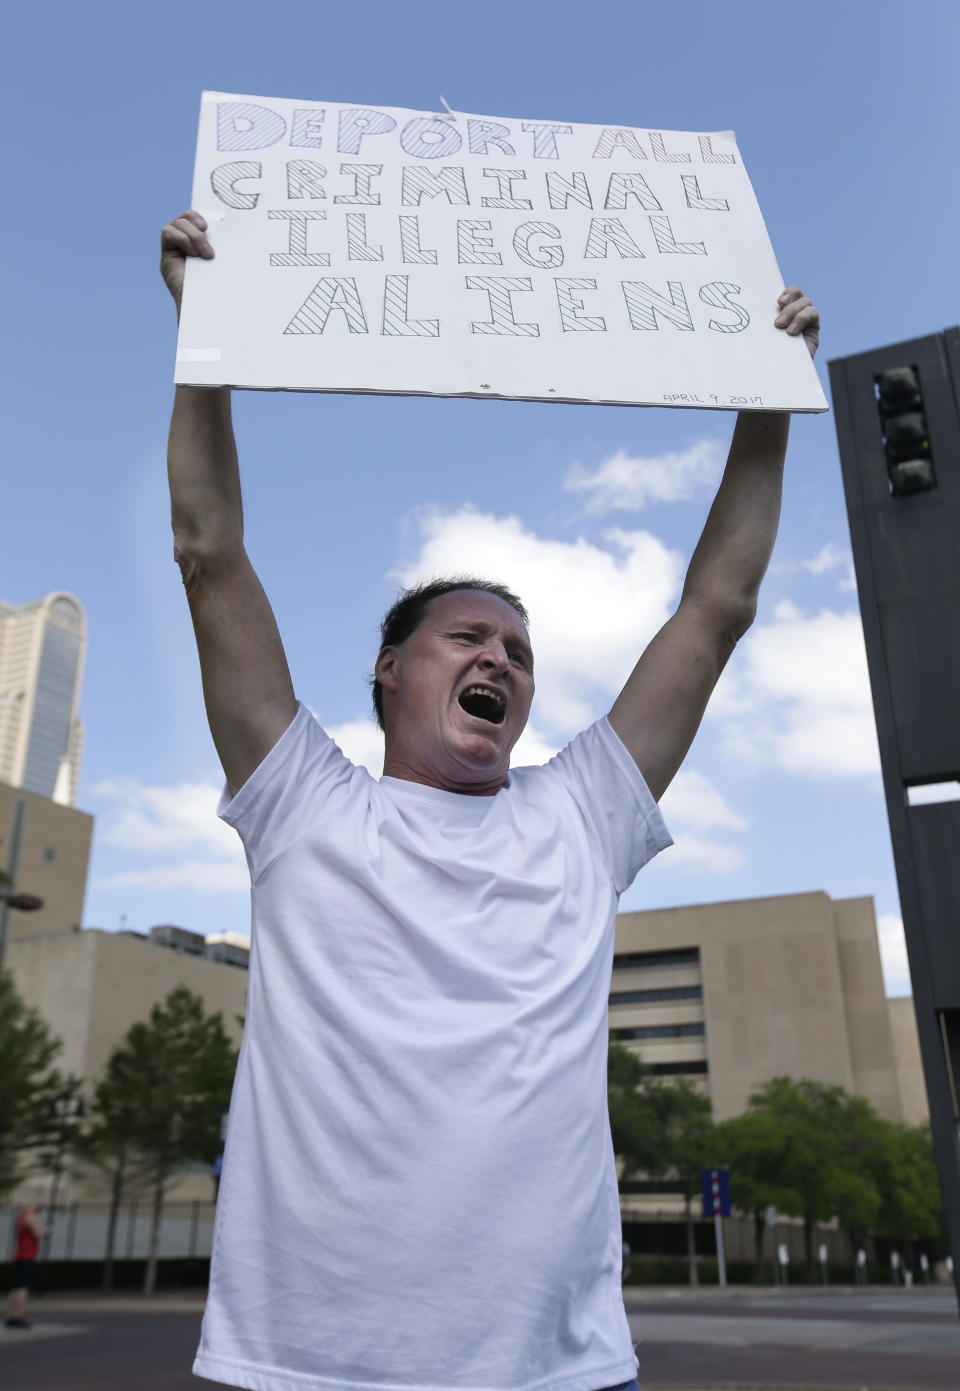 Rocky C. Beaudreau, a supporter of President Donald Trump, holds sign across the street from protestors marching through downtown Dallas, Sunday, April 9, 2017. Thousands of people are marching and rallying in downtown Dallas to call for an overhaul of the nation's immigration system and end to what organizers say is an aggressive deportation policy. (AP Photo/LM Otero)